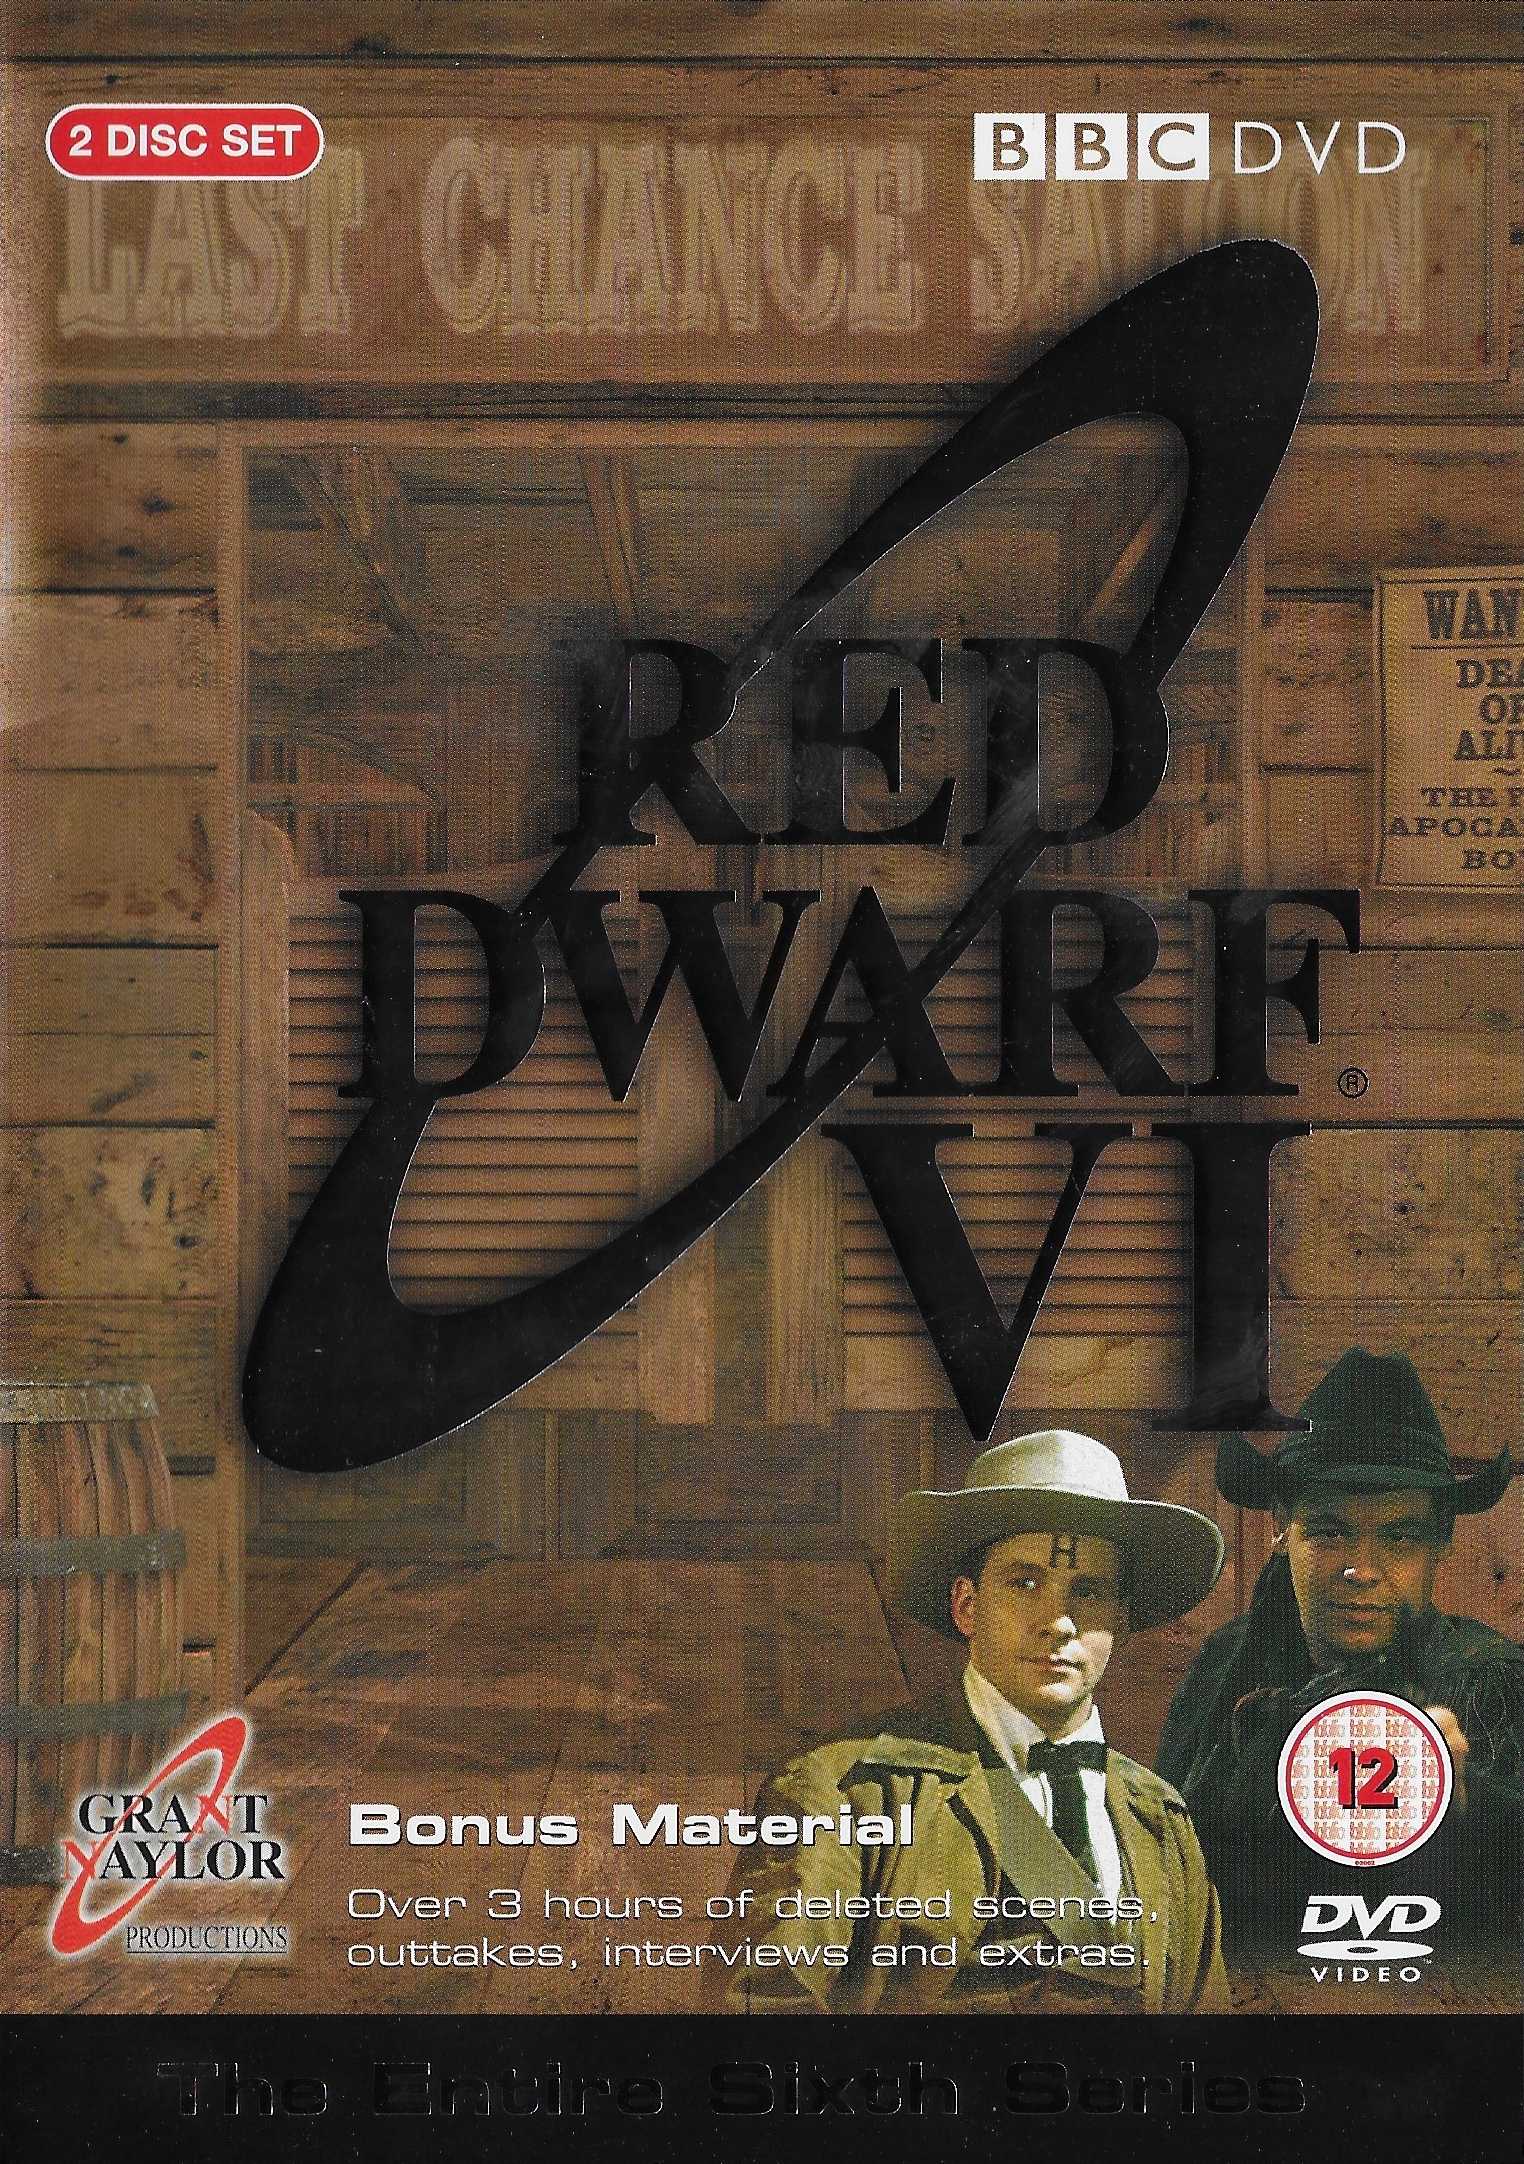 Picture of BBCDVD 1372 Red dwarf - Series VI by artist Rob Grant / Doug Naylor